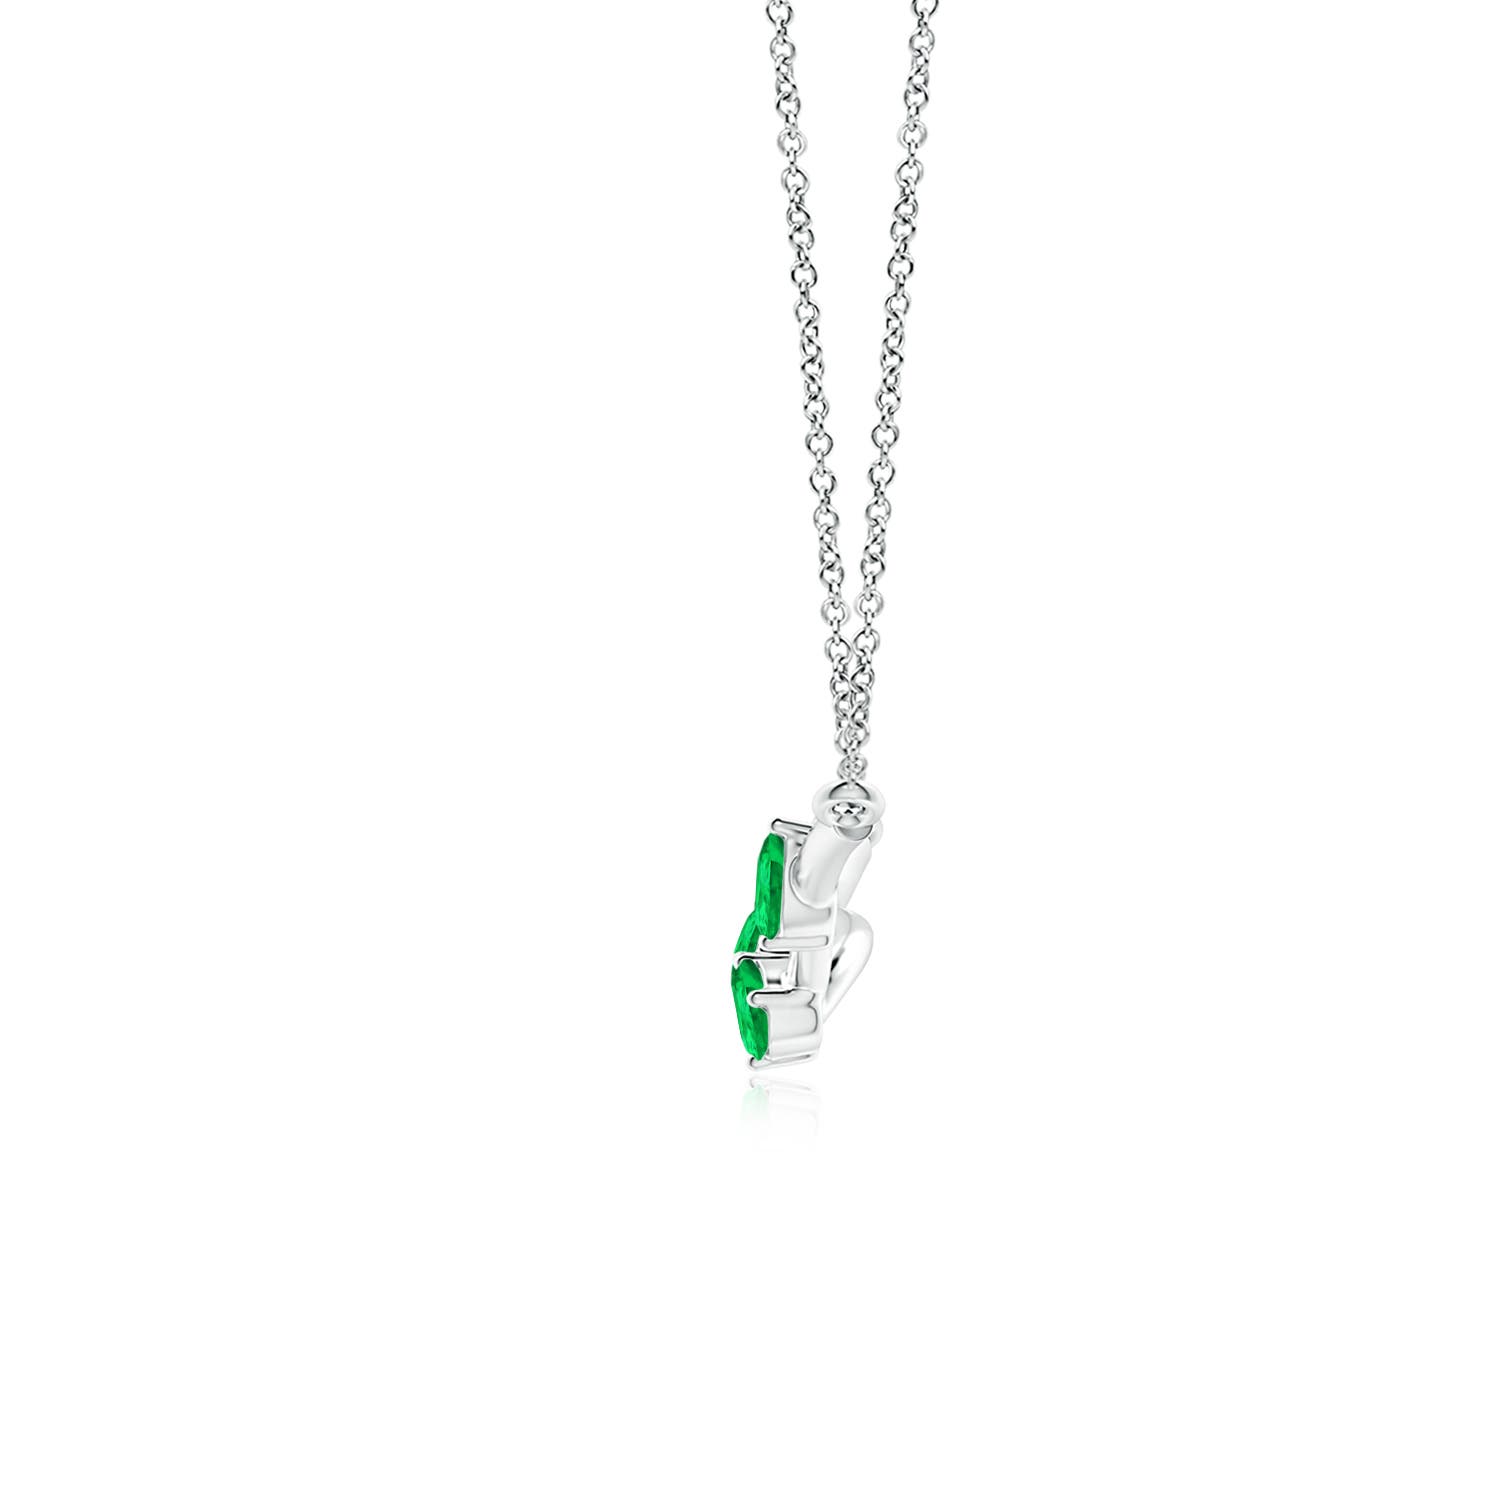 AAA - Emerald / 0.6 CT / 14 KT White Gold